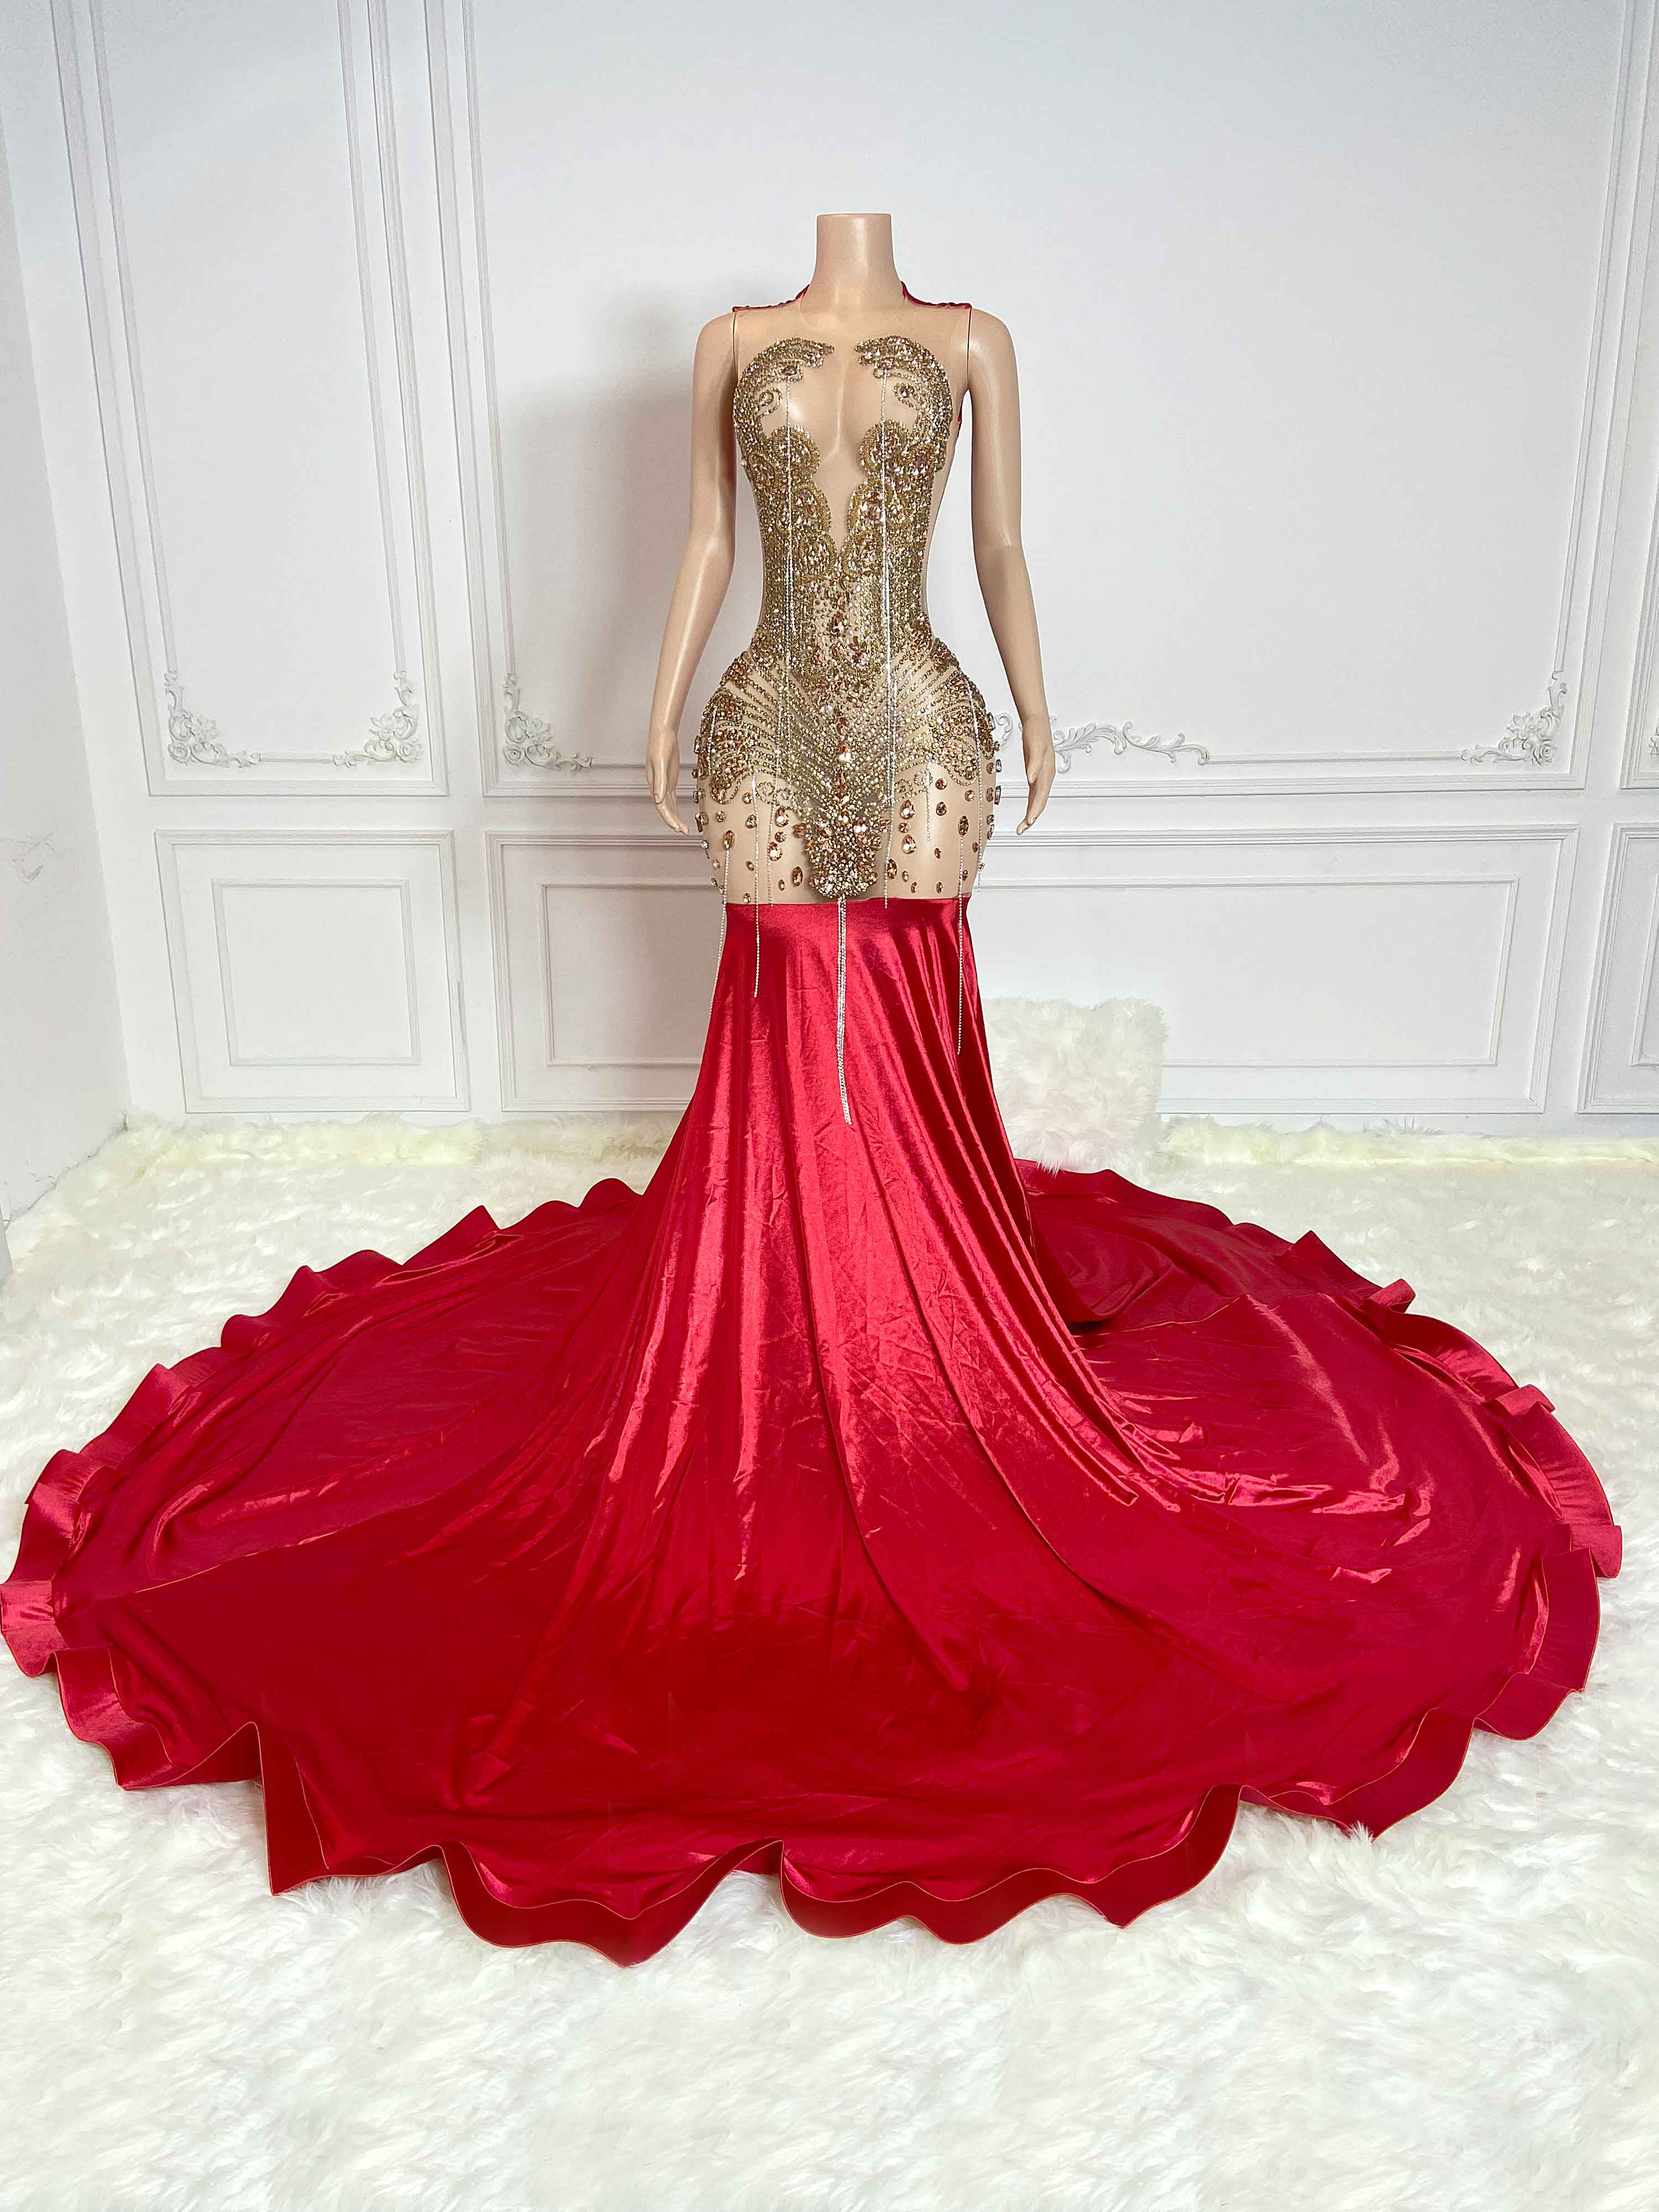 Buy Breathtaking Red Sleeveless Ballgown Wedding/debut Dress With Cathedral  Train or Tiered Skirt Online in India - Etsy